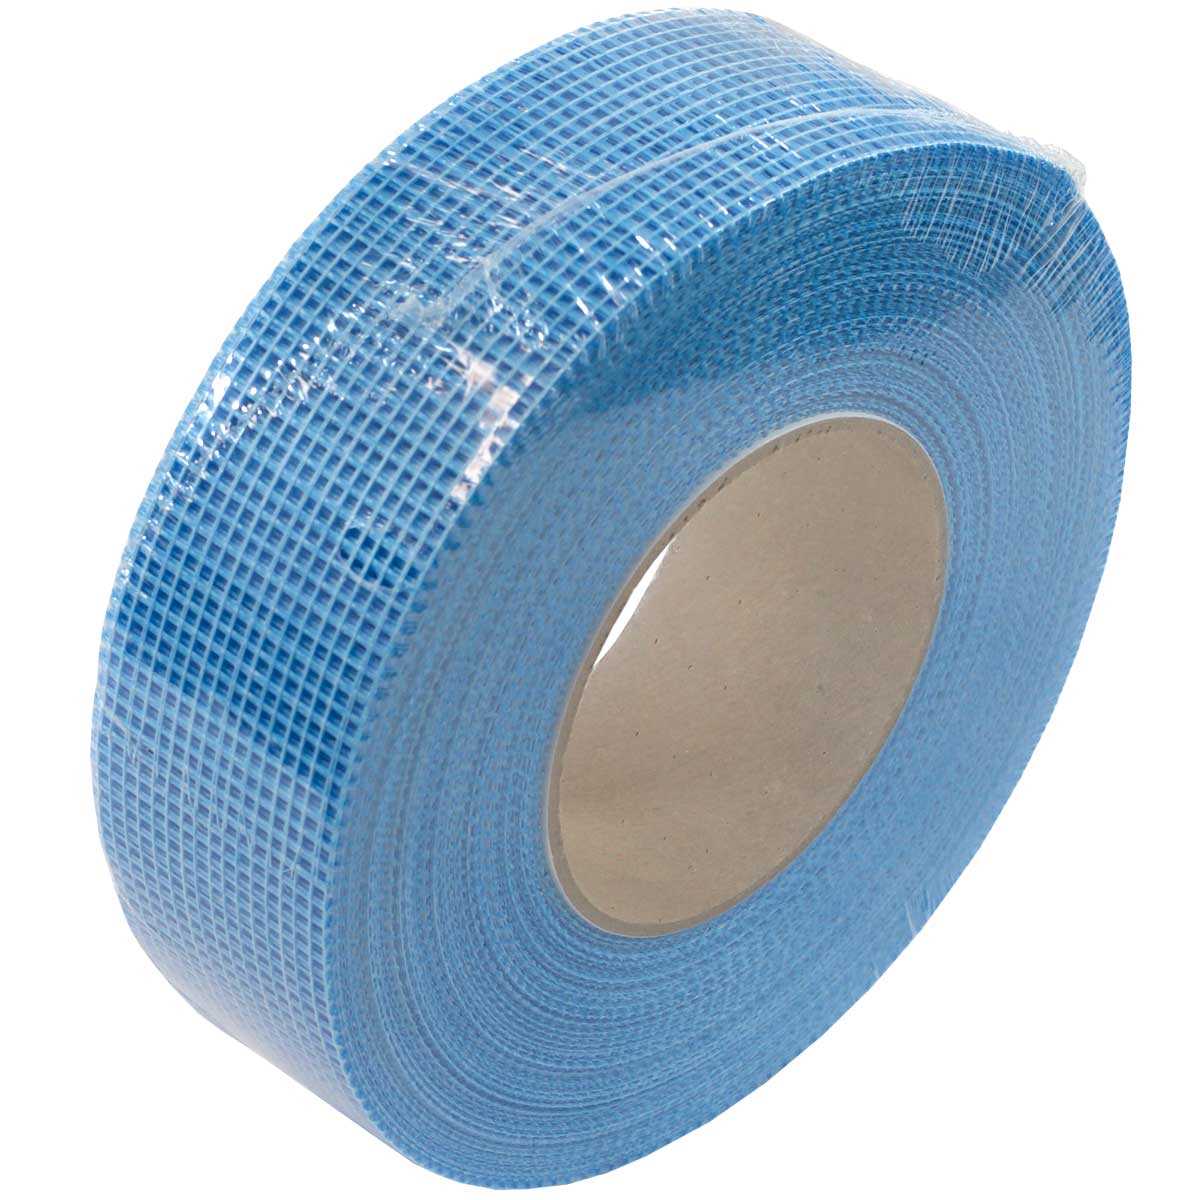 How to choose the right drywall tape? Paper or Fiberglass Mesh